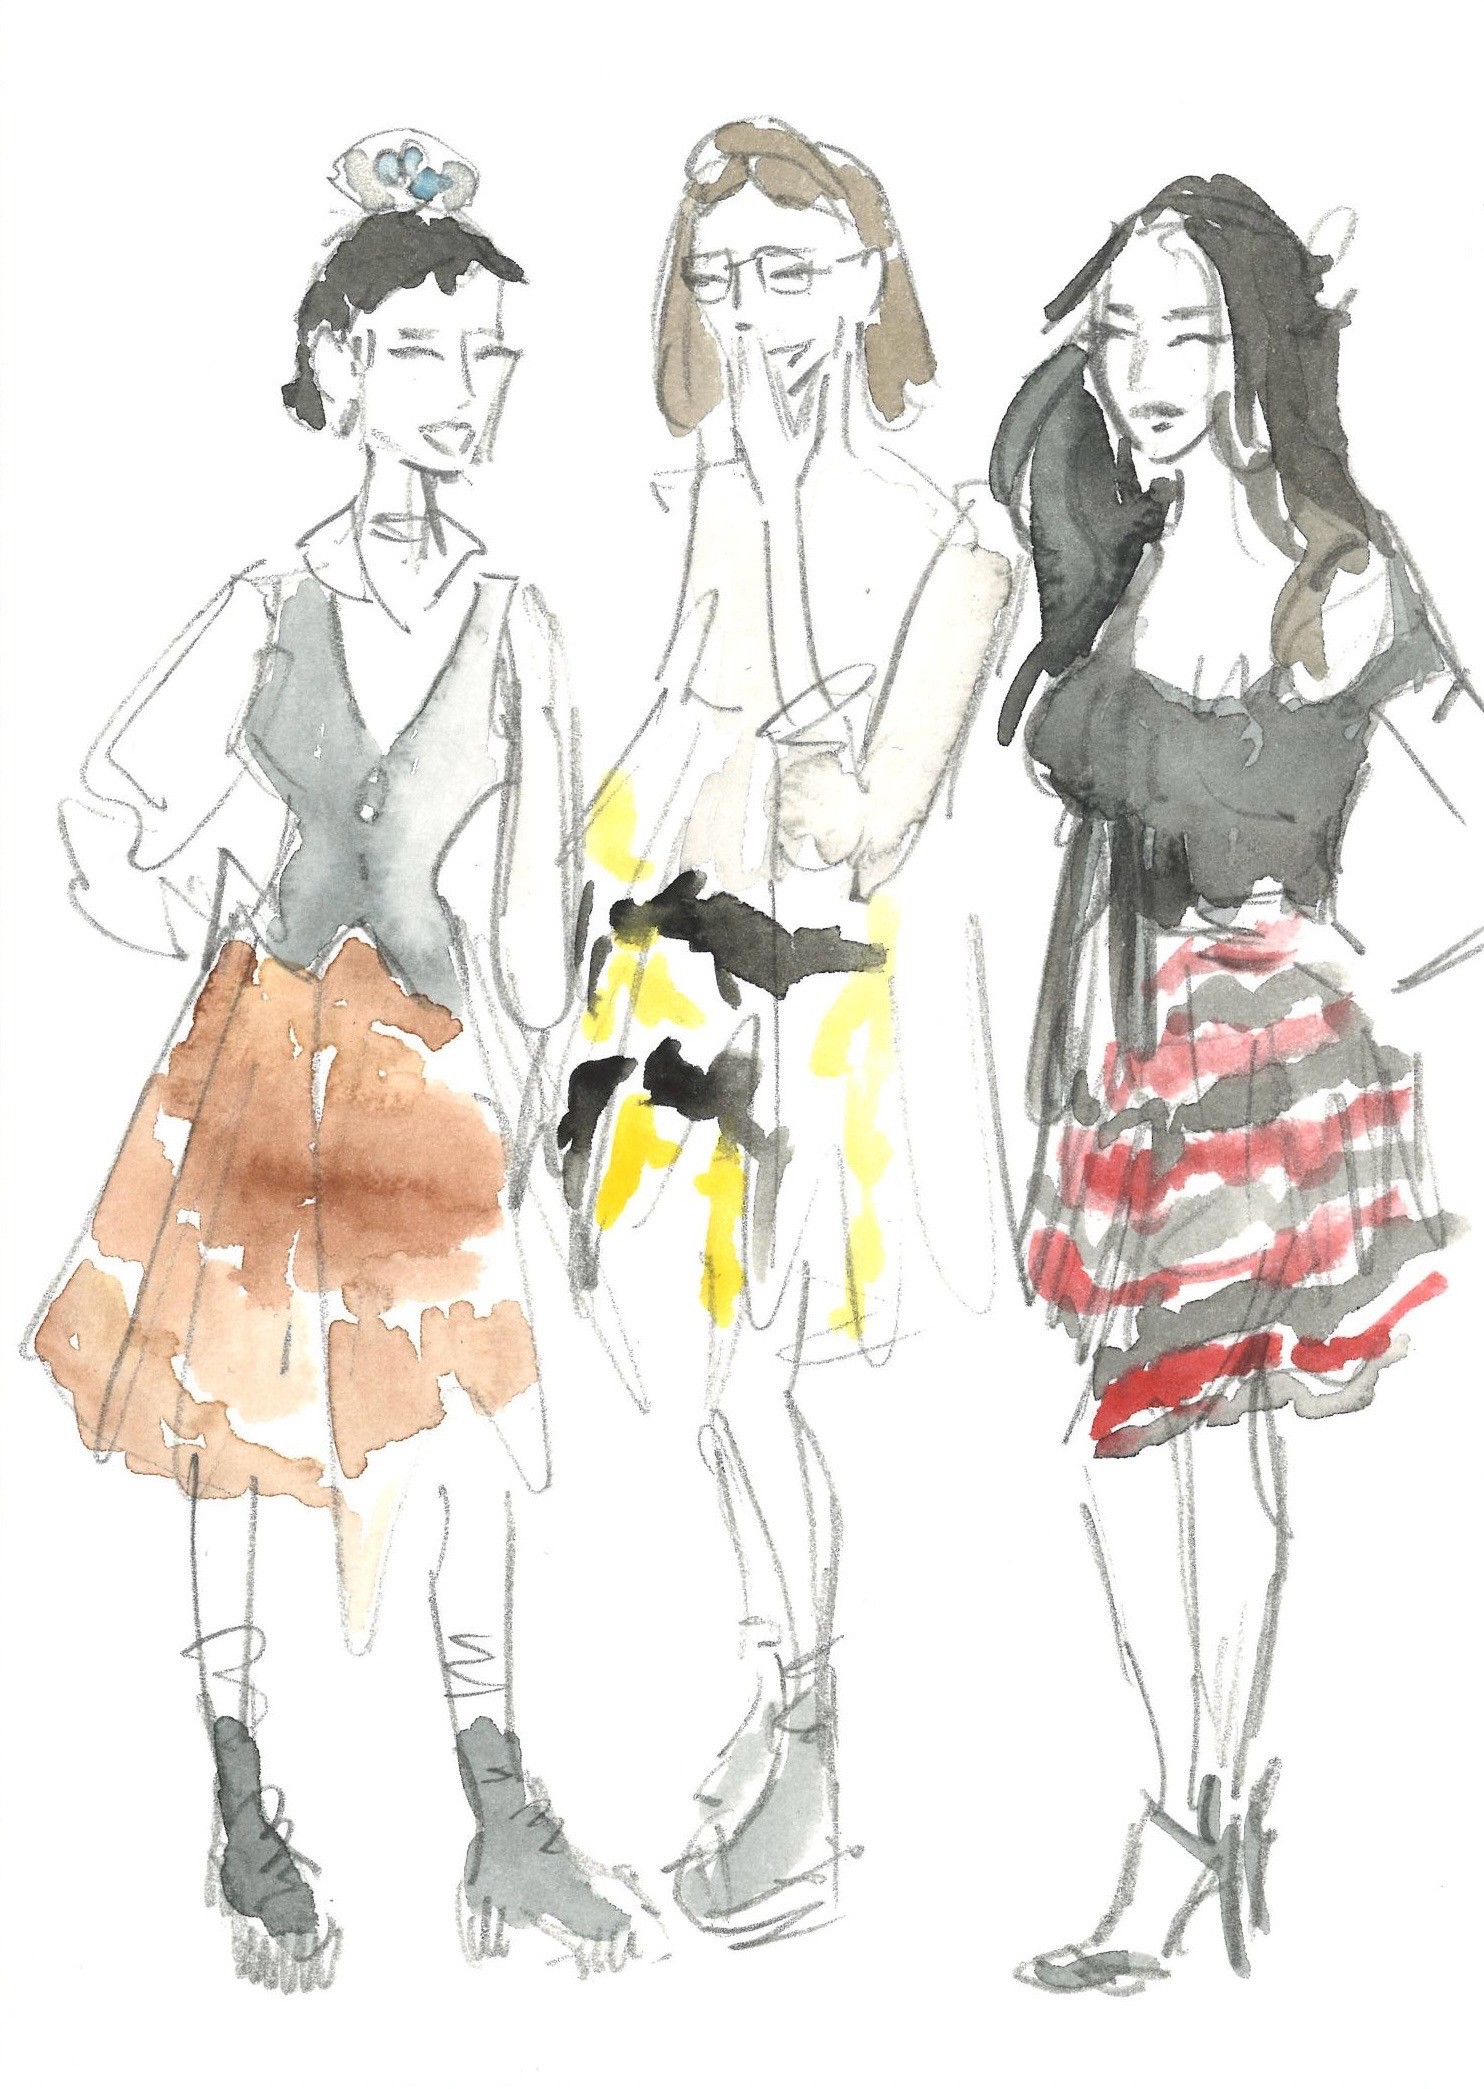 Pencil and watercolor sketch of three young women